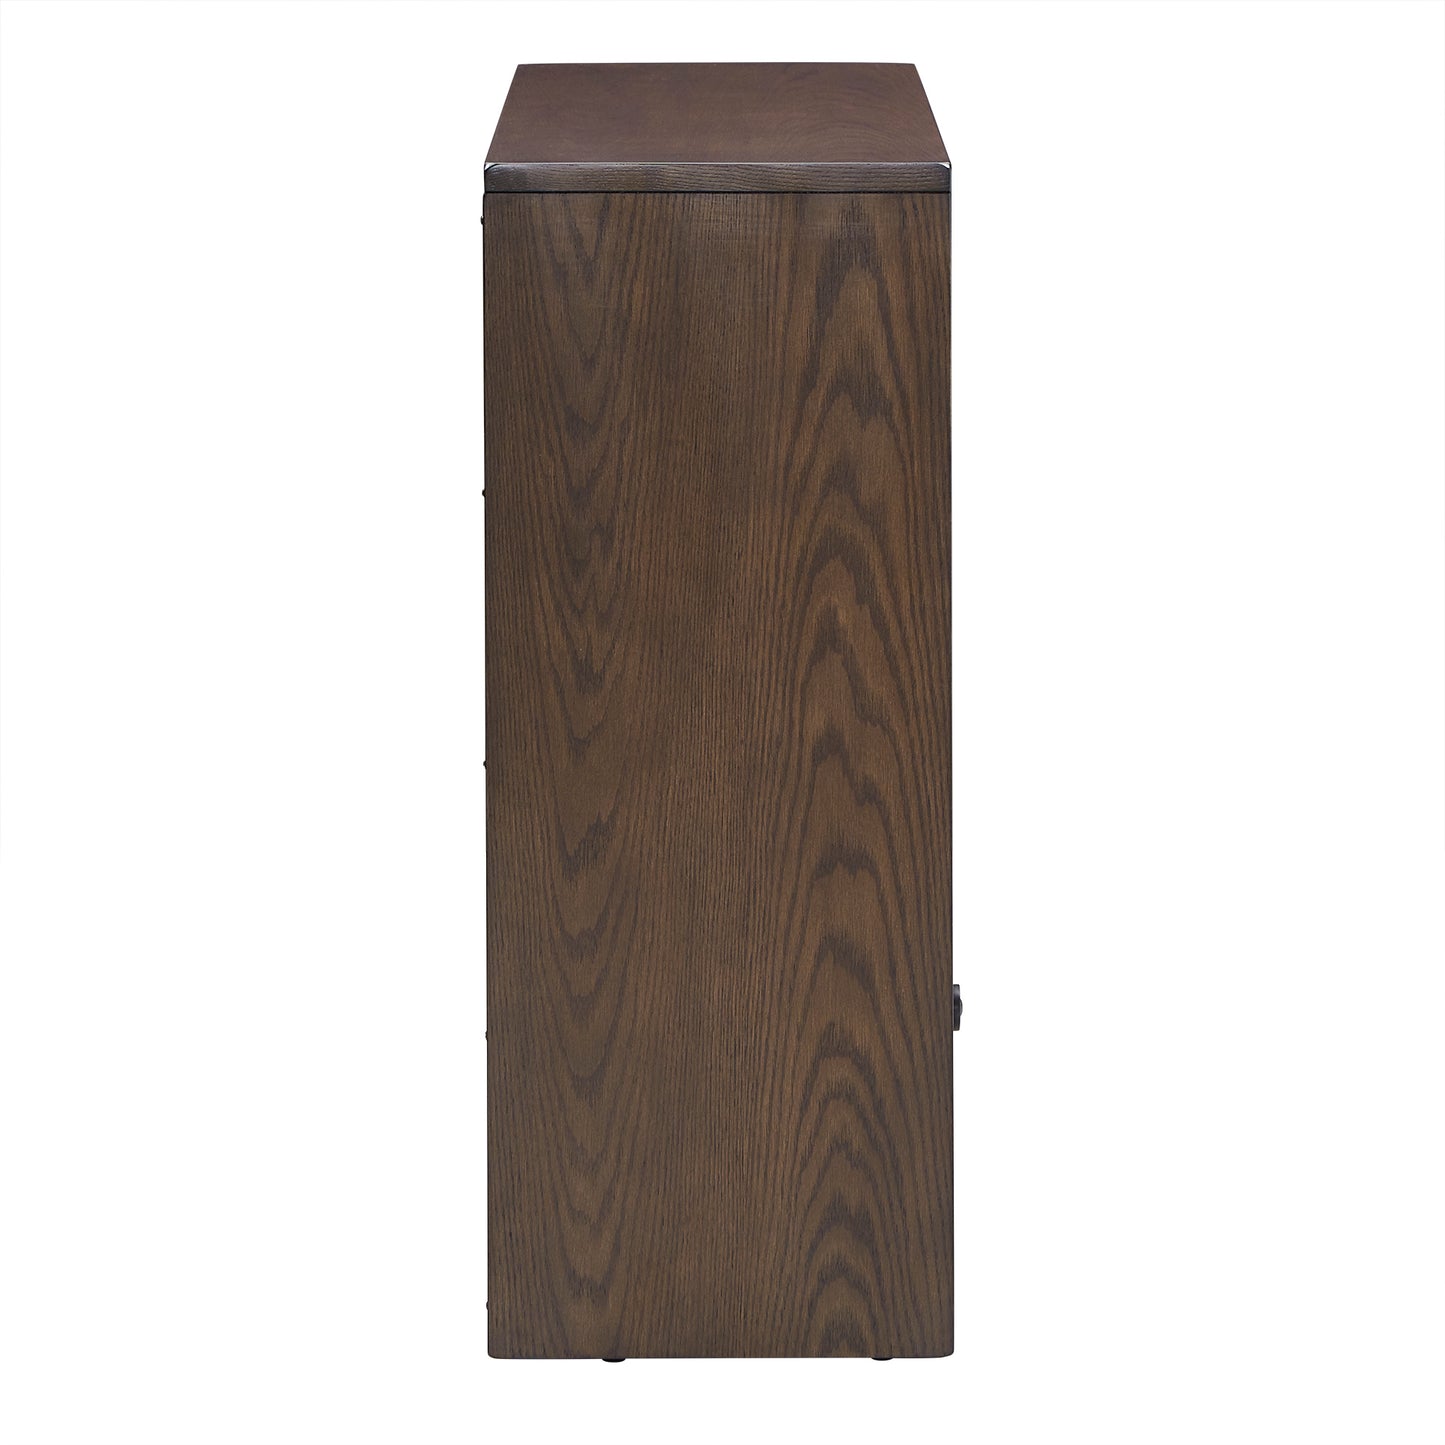 Dark Oak Finish Wood Cabinet - With Tip-Out Bins